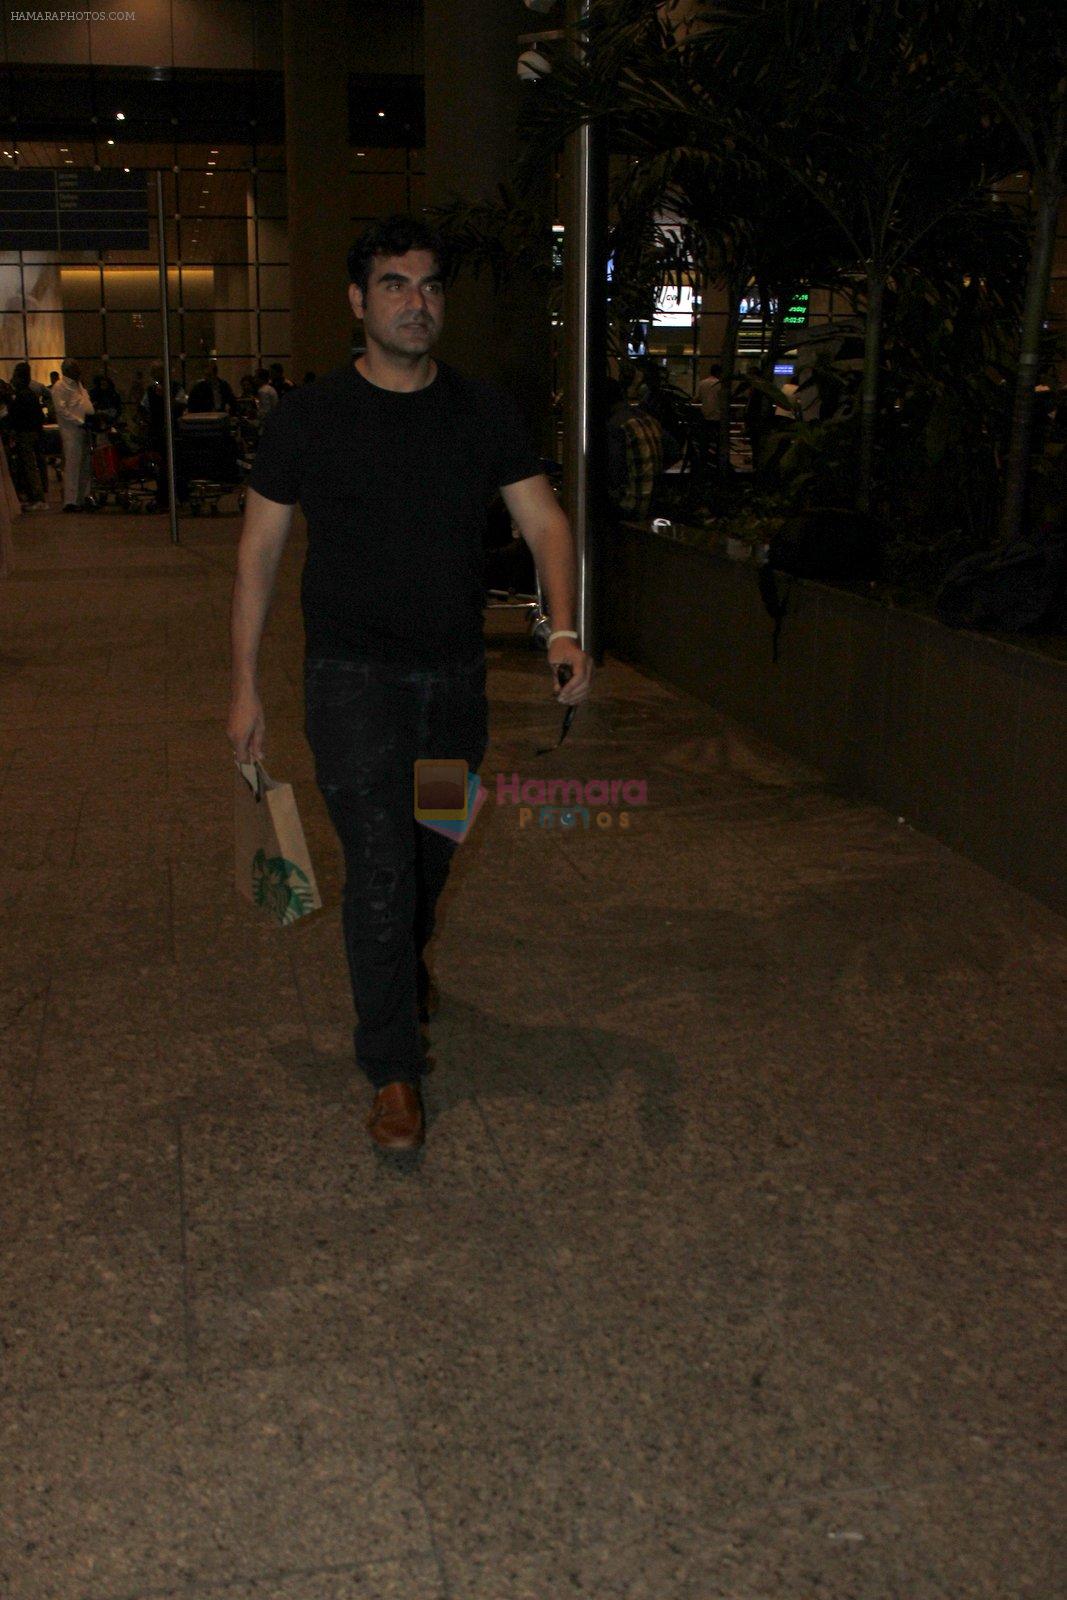 Arbaaz Khan snapped at airport on 16th June 2016